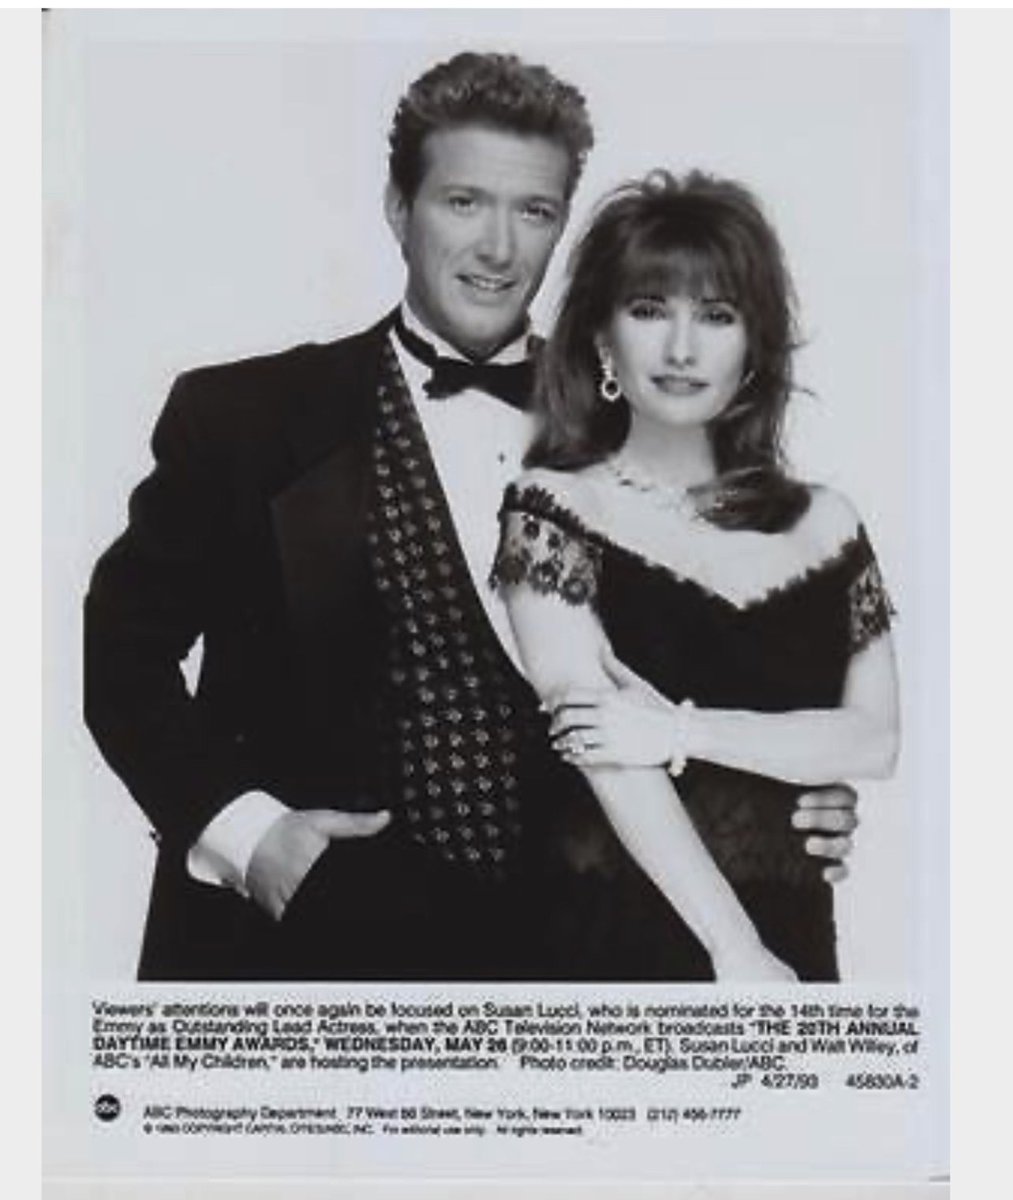 30 years ago today, #SusanLucci and #WaltWilley hosted the Daytime Emmy Awards. Susan was nominated for Outstanding Lead Actress for the 14th time, but lost to Linda Dano from “Another World.” #AllMyChildren